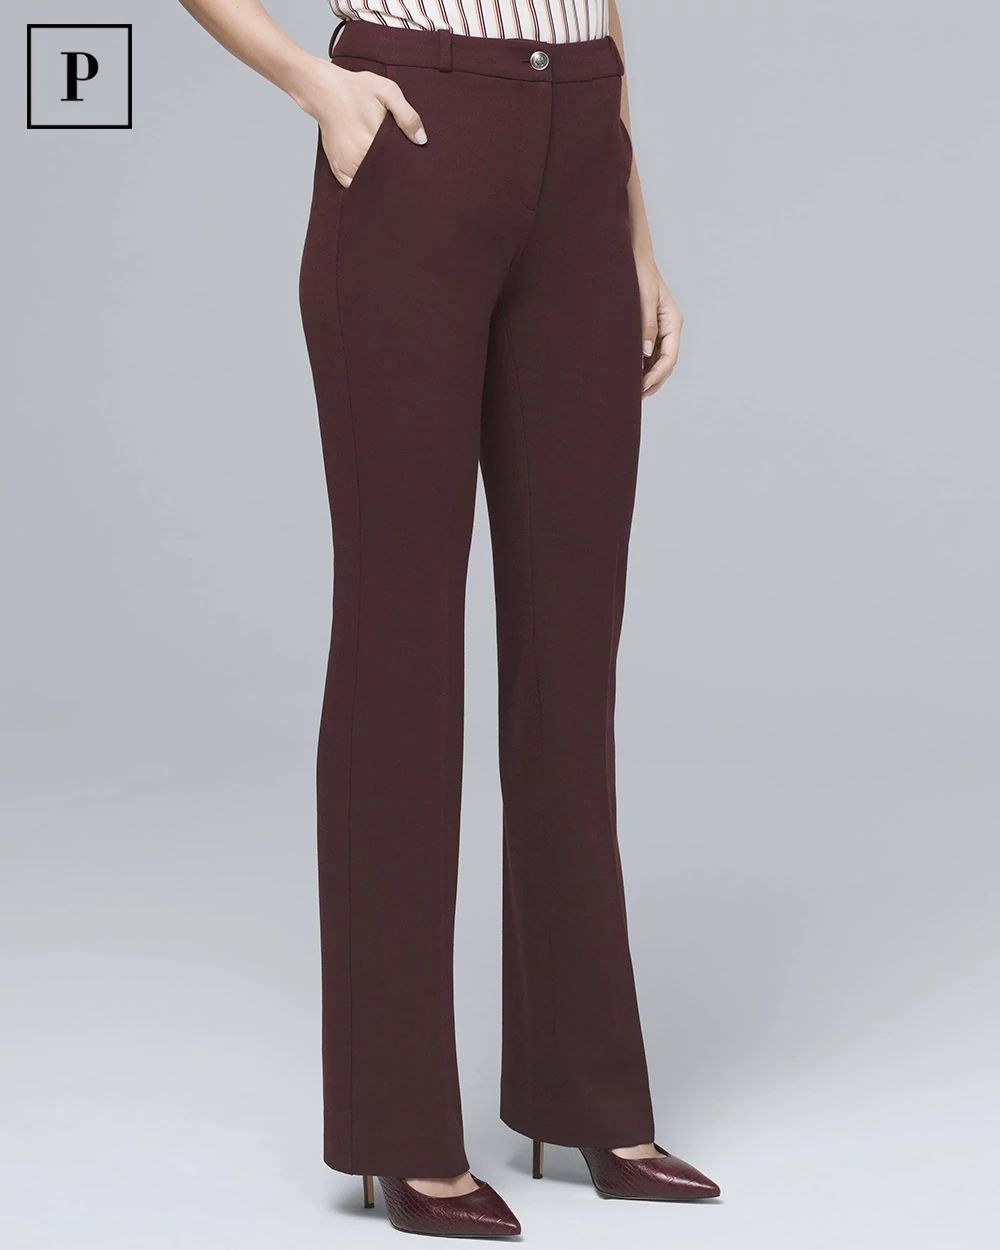 Petite Luxe Suiting Bootcut Pants